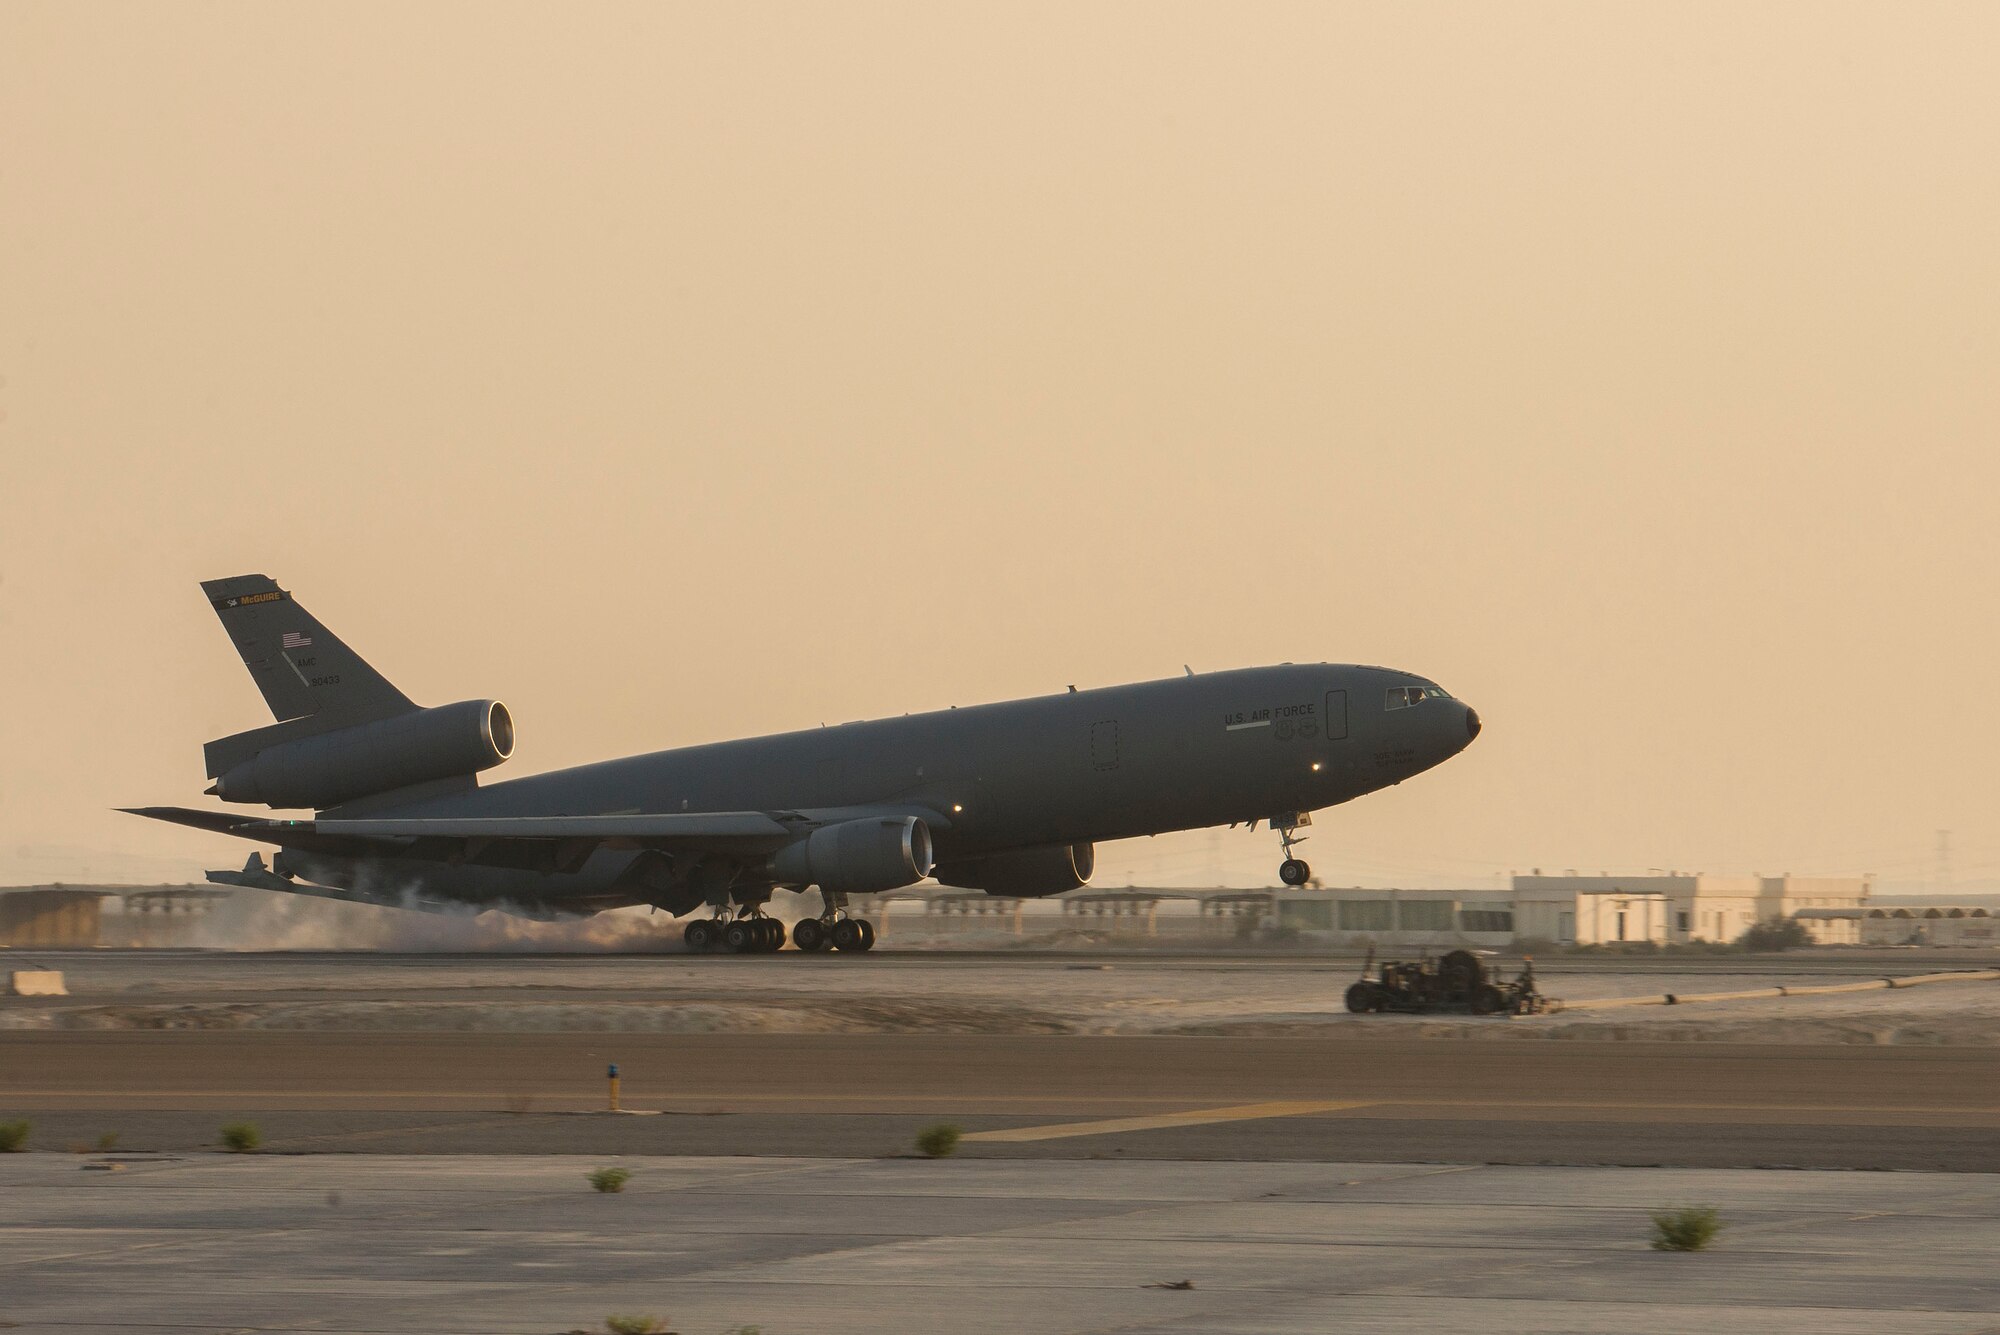 A U.S. Air Force KC-10 Extender assigned to the 908th Expeditionary Air Refueling Squadron lands on the flightline at Al Dhafra Air Base, United Arab Emirates, Nov. 16, 2020.